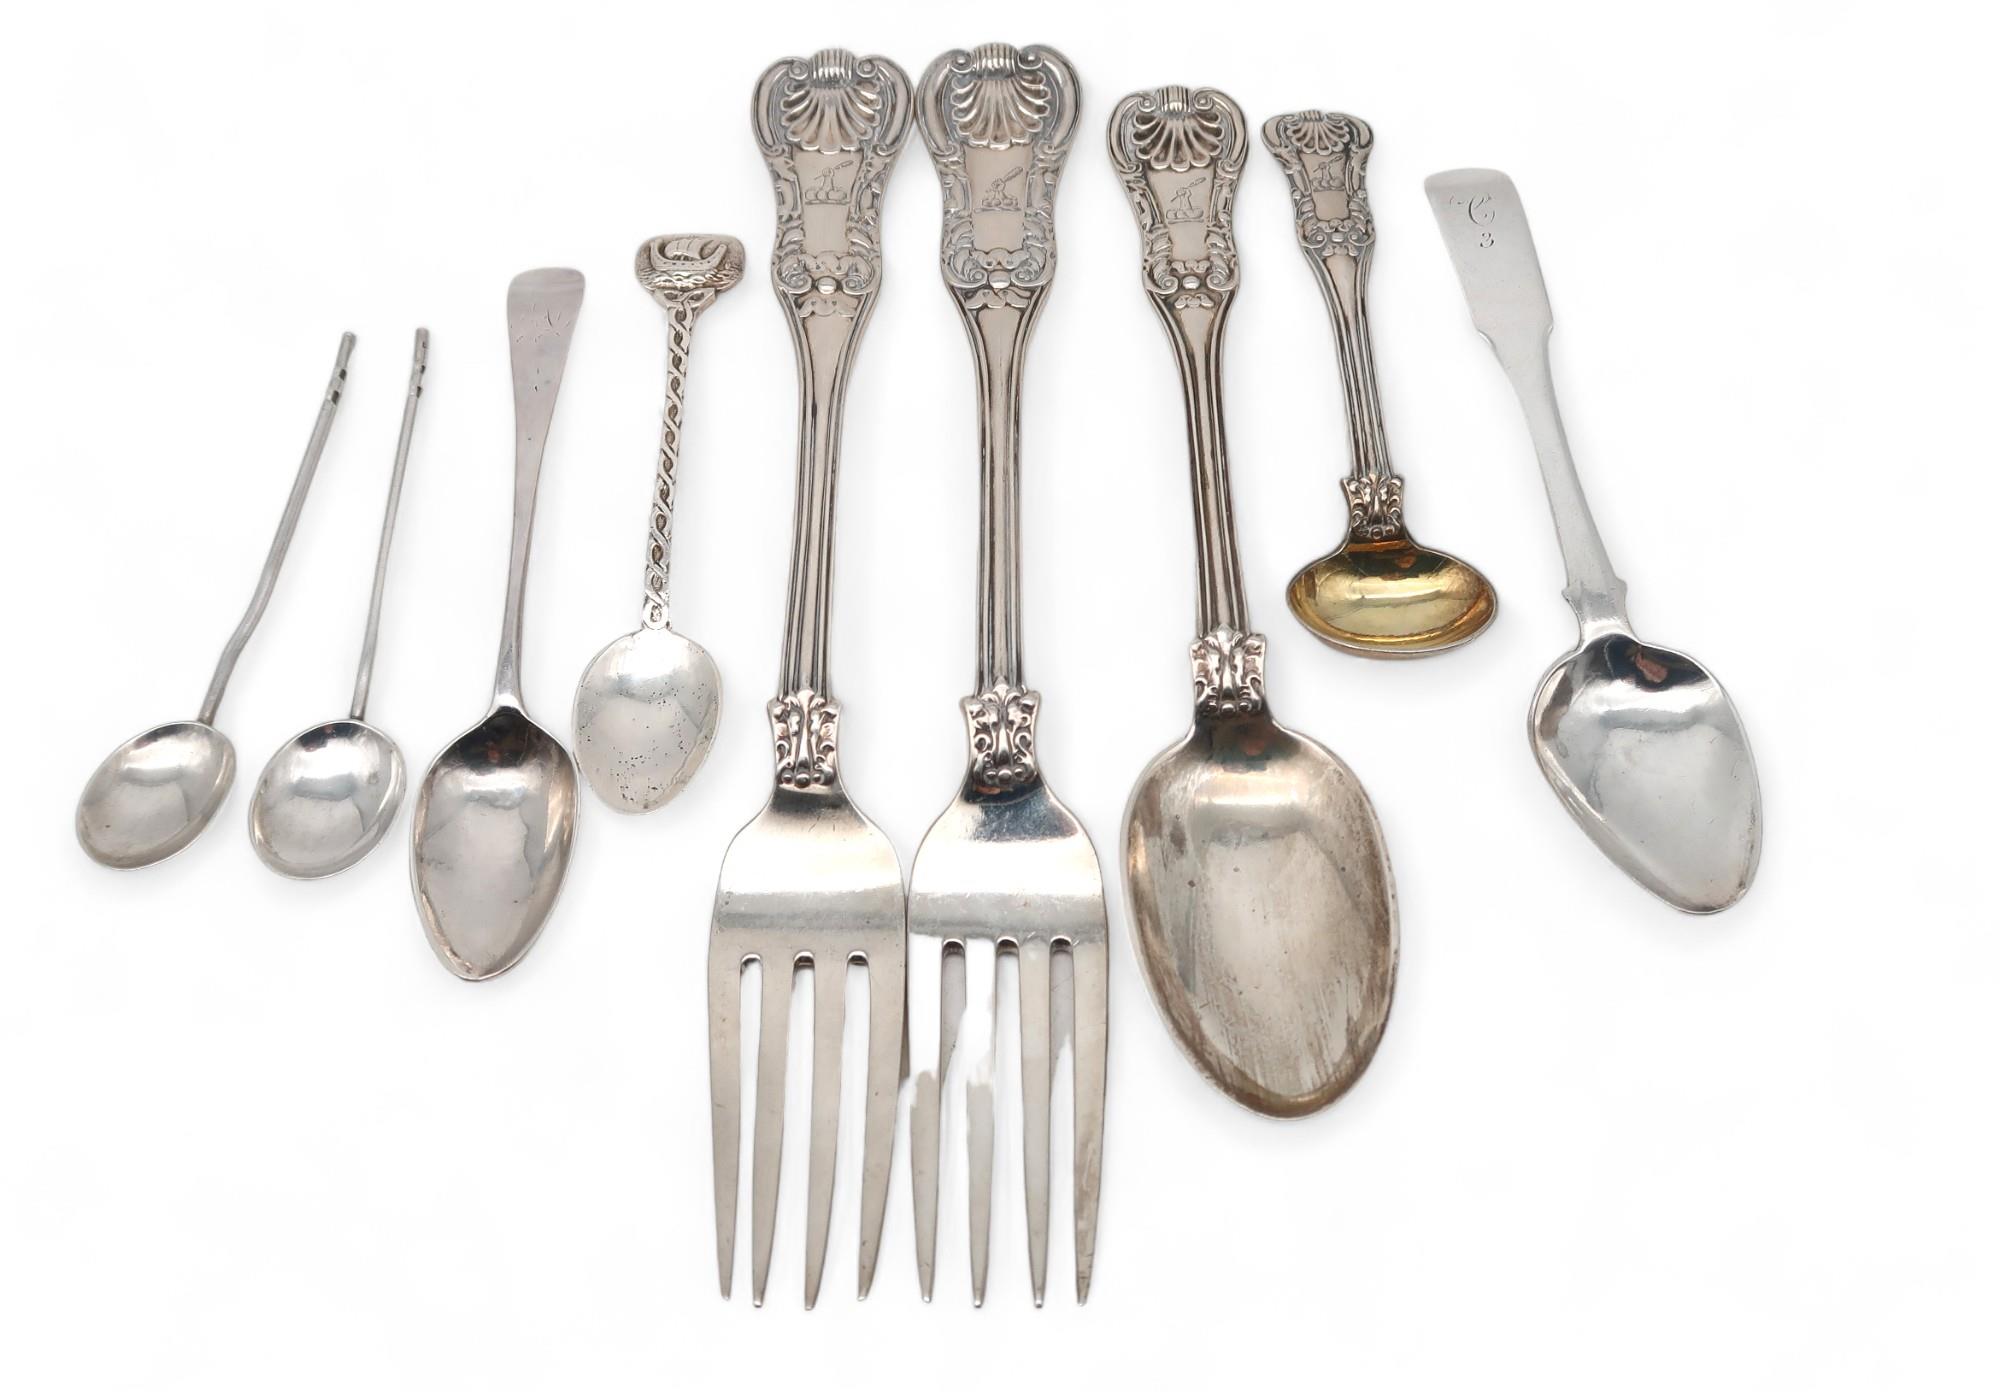 Two Georgian / William IV Scottish silver forks, by Milne & Campbell, one Glasgow 1825, another